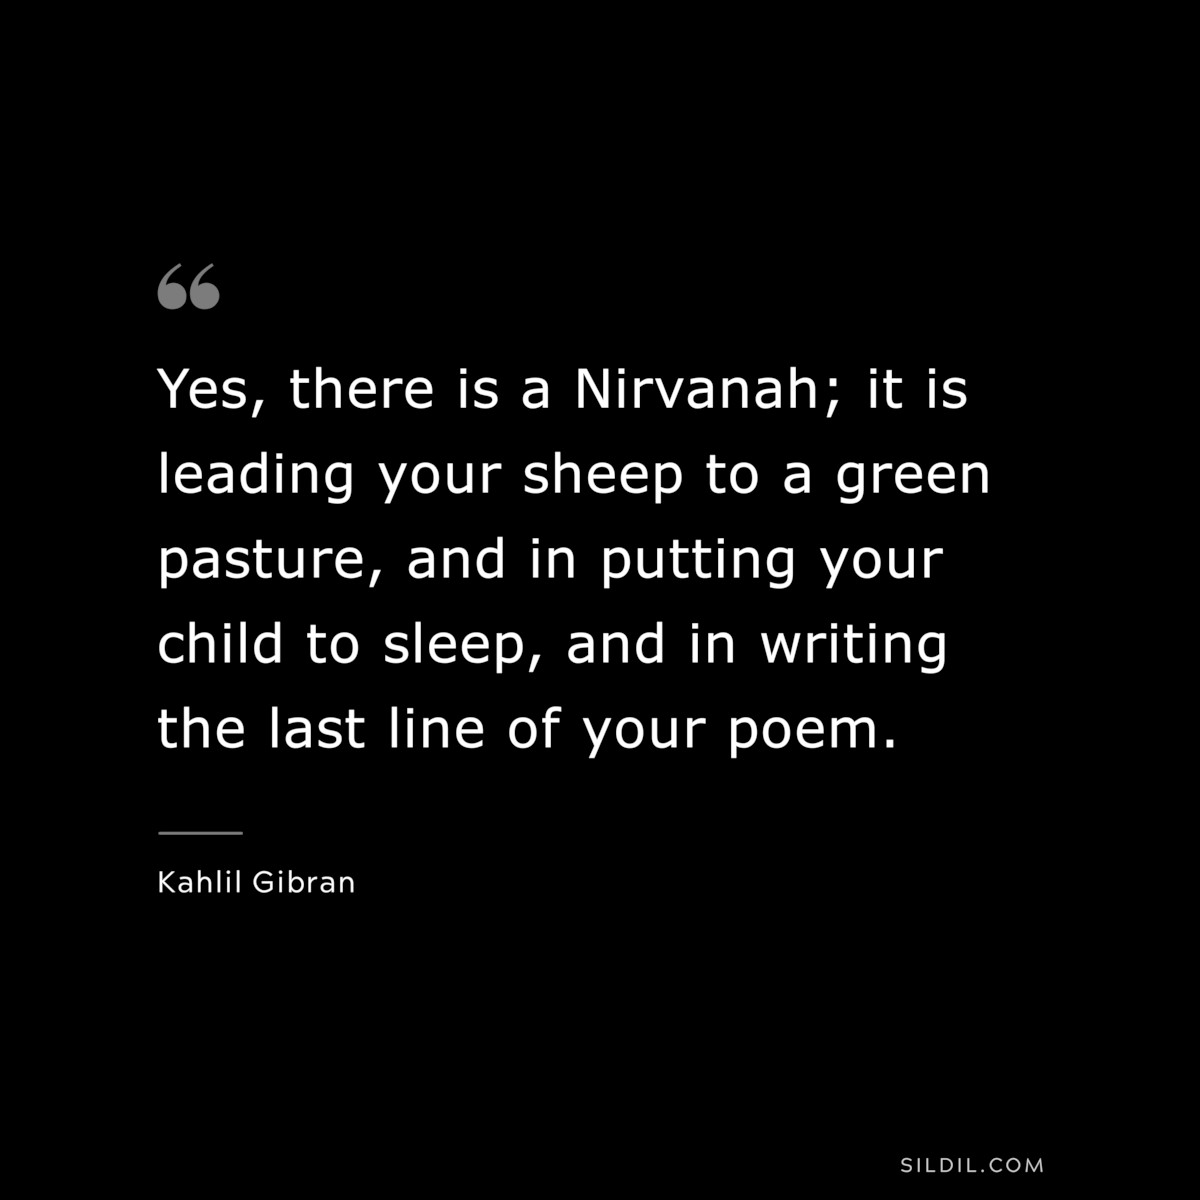 Yes, there is a Nirvanah; it is leading your sheep to a green pasture, and in putting your child to sleep, and in writing the last line of your poem. ― Kahlil Gibran